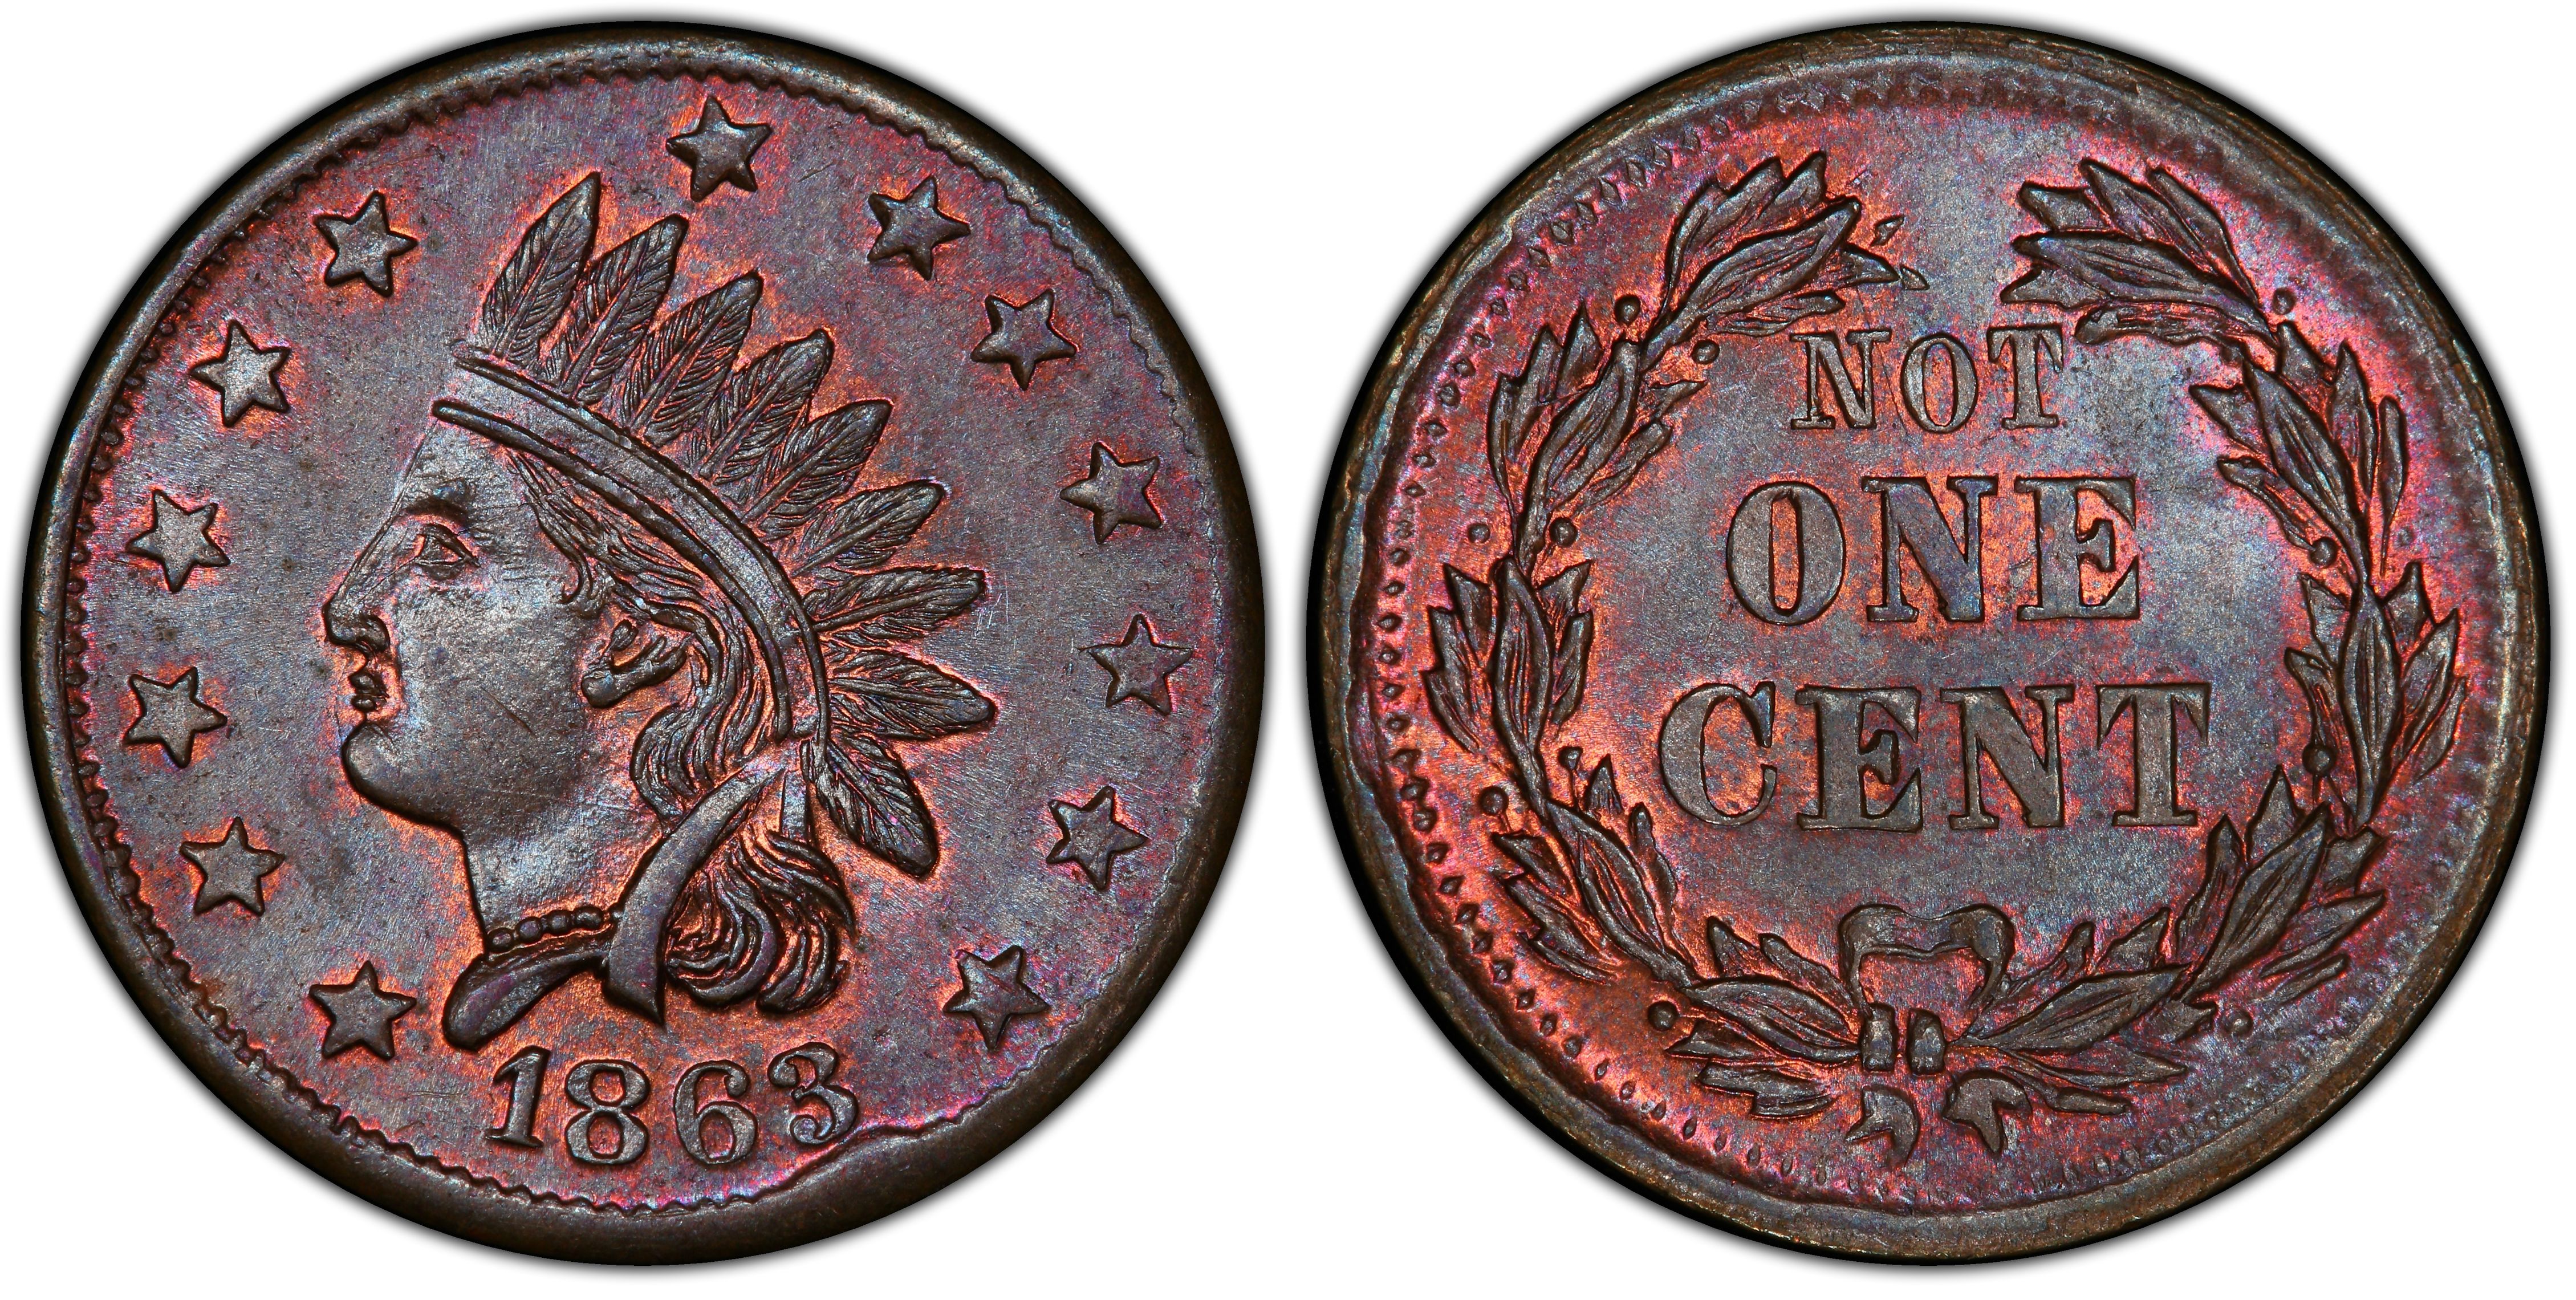 Details about   1863 United States Copper Good For One Cent Tradesmens Currency  AU 